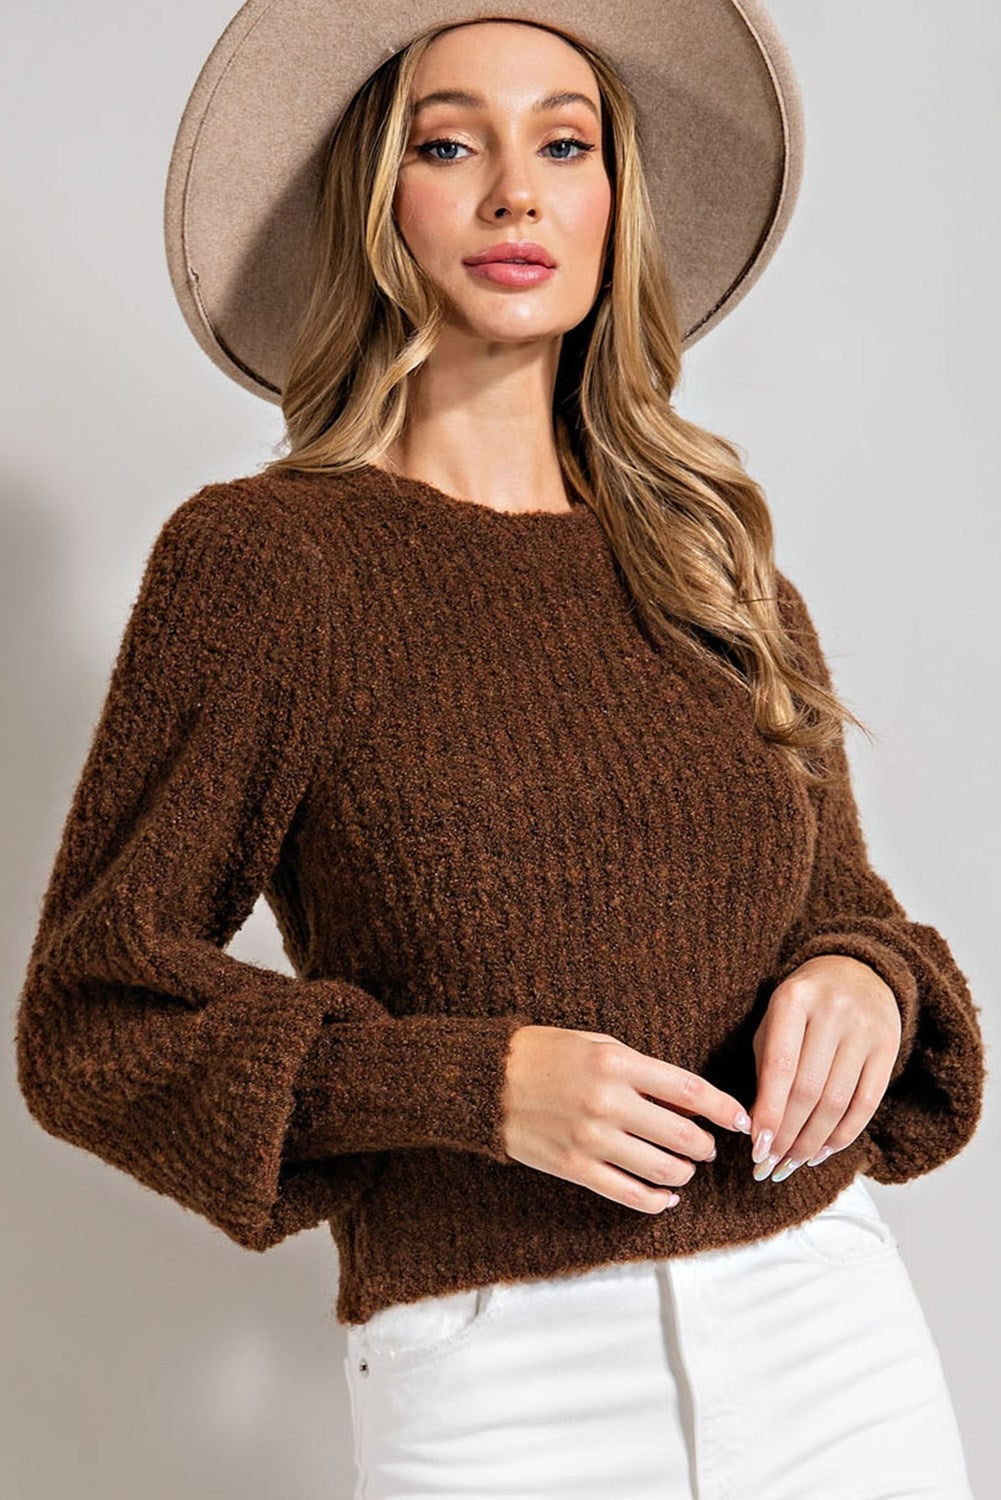 Long sleeved, fuzzy sweater in size small to large in brown.